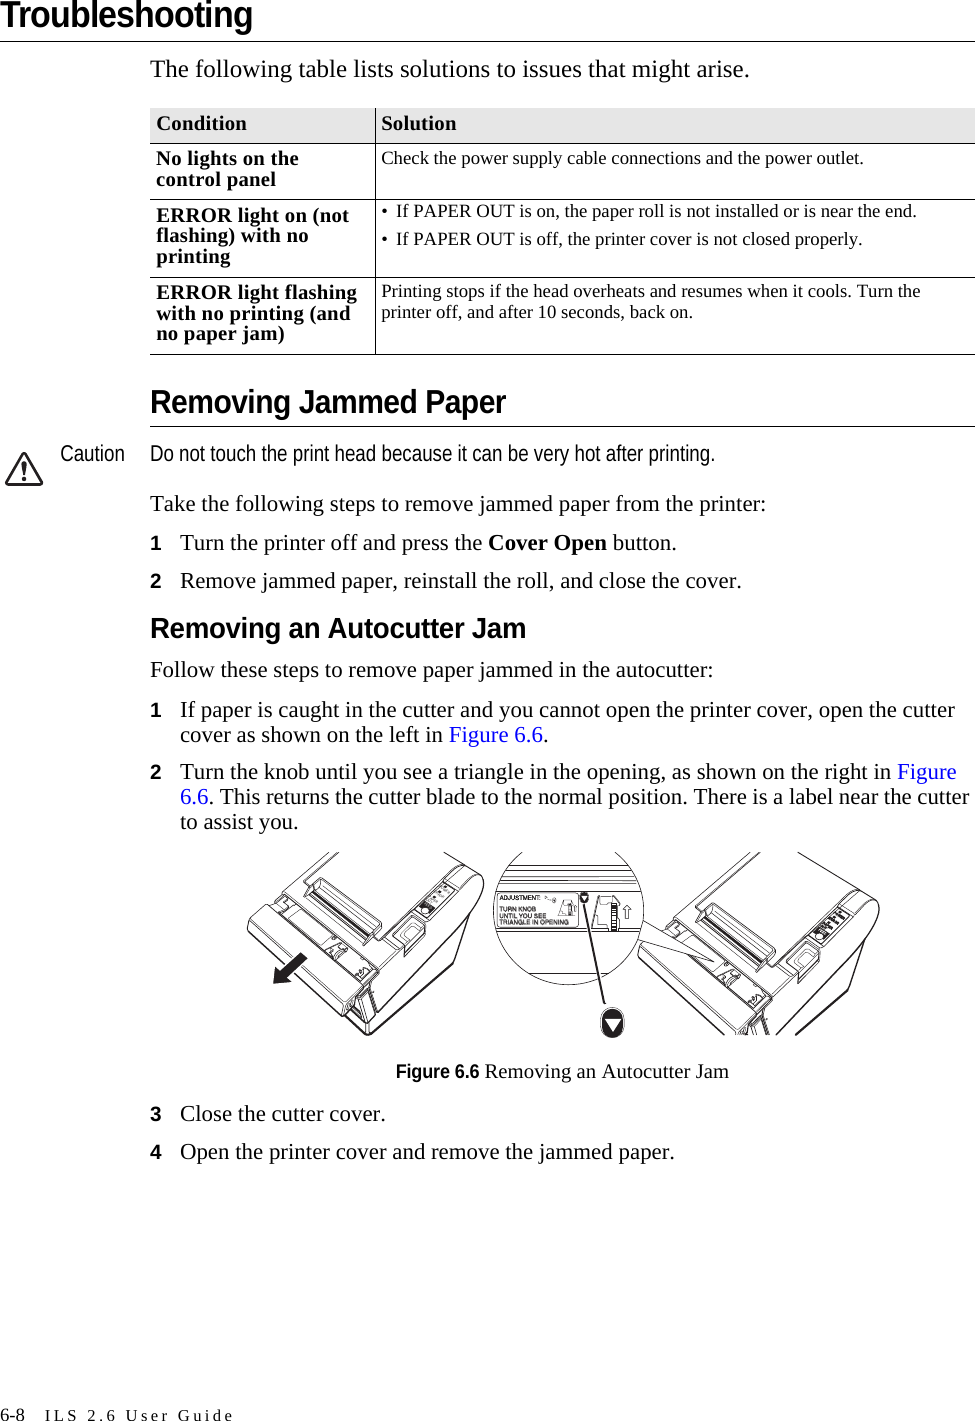 6-8 ILS 2.6 User GuideTroubleshootingThe following table lists solutions to issues that might arise.Removing Jammed PaperCaution Do not touch the print head because it can be very hot after printing.Take the following steps to remove jammed paper from the printer:1Turn the printer off and press the Cover Open button.2Remove jammed paper, reinstall the roll, and close the cover.Removing an Autocutter JamFollow these steps to remove paper jammed in the autocutter:1If paper is caught in the cutter and you cannot open the printer cover, open the cutter cover as shown on the left in Figure 6.6.2Turn the knob until you see a triangle in the opening, as shown on the right in Figure 6.6. This returns the cutter blade to the normal position. There is a label near the cutter to assist you.Figure 6.6 Removing an Autocutter Jam3Close the cutter cover.4Open the printer cover and remove the jammed paper.Condition SolutionNo lights on the control panel Check the power supply cable connections and the power outlet.ERROR light on (not flashing) with no printing• If PAPER OUT is on, the paper roll is not installed or is near the end.• If PAPER OUT is off, the printer cover is not closed properly.ERROR light flashing with no printing (and no paper jam)Printing stops if the head overheats and resumes when it cools. Turn the printer off, and after 10 seconds, back on.ERRORPOWERPAPEROUTFEEDERRORPOWERPAPEROUTFEEDFEEDADJUSTMENT:TURN KNOBTURN KNOBUNTIL YOU SEEUNTIL YOU SEETRIANGLE IN OPENINGTRIANGLE IN OPENING